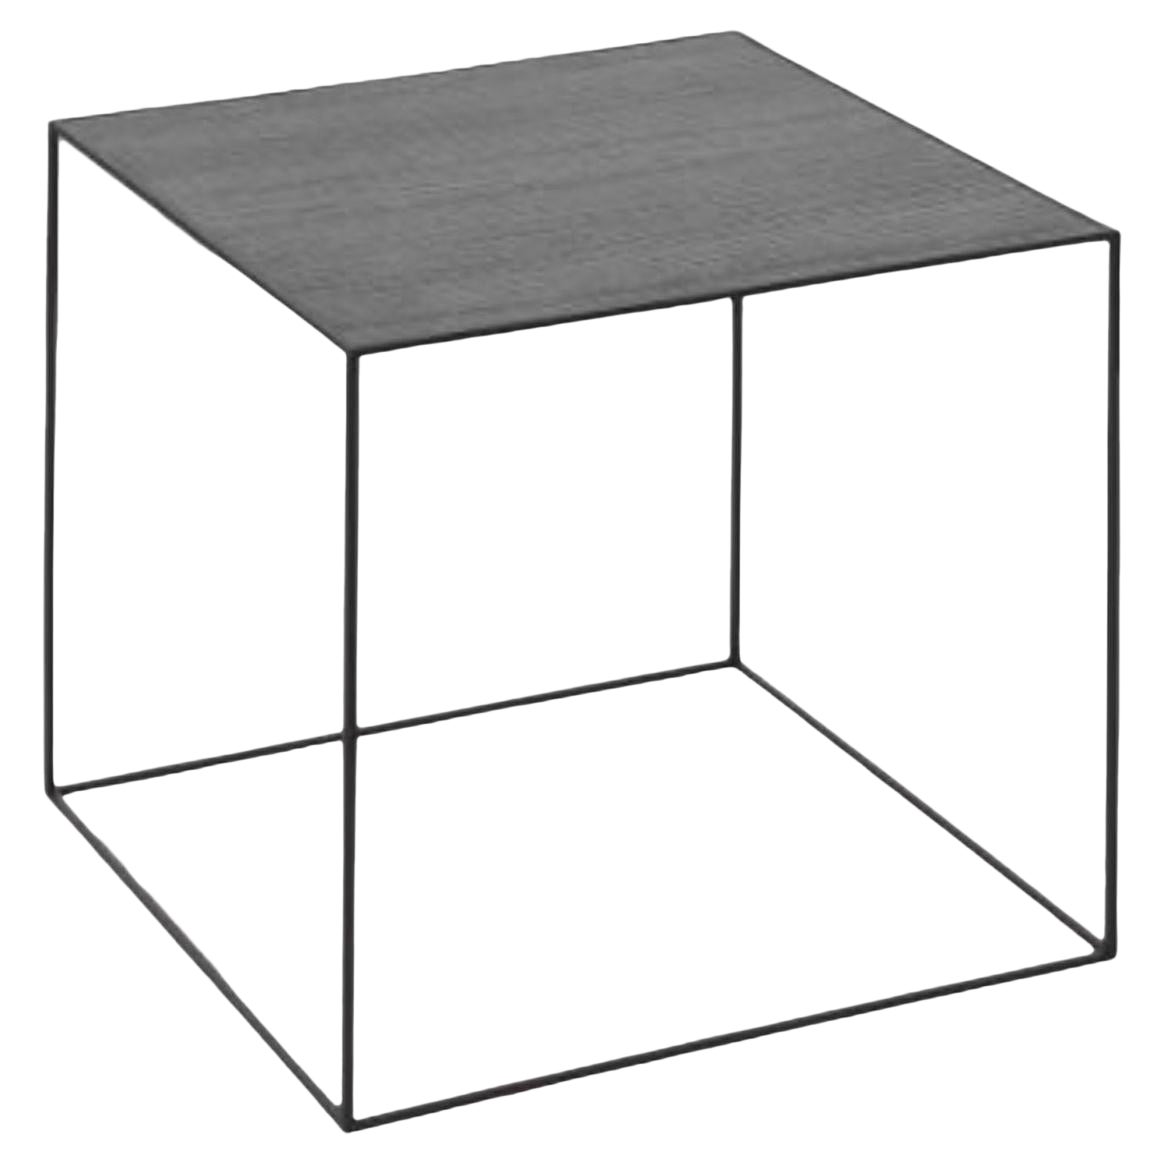 35 Black Ash Twin Table Top by Lassen For Sale